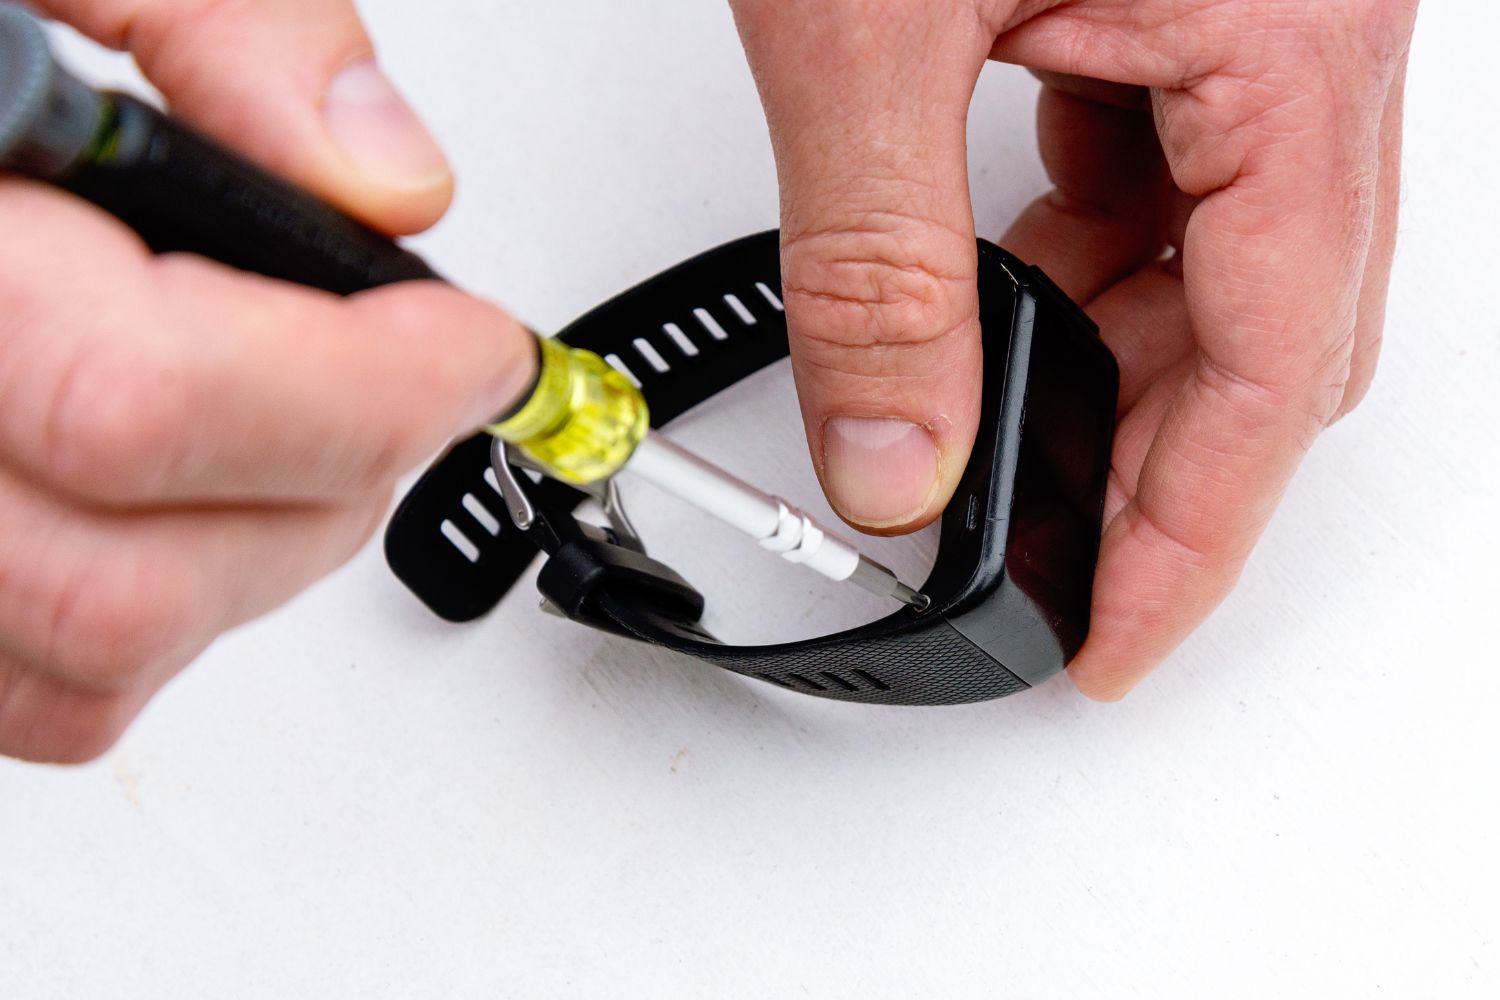 A person using a tool from one of the best screwdriver sets to tighten a watch screw.